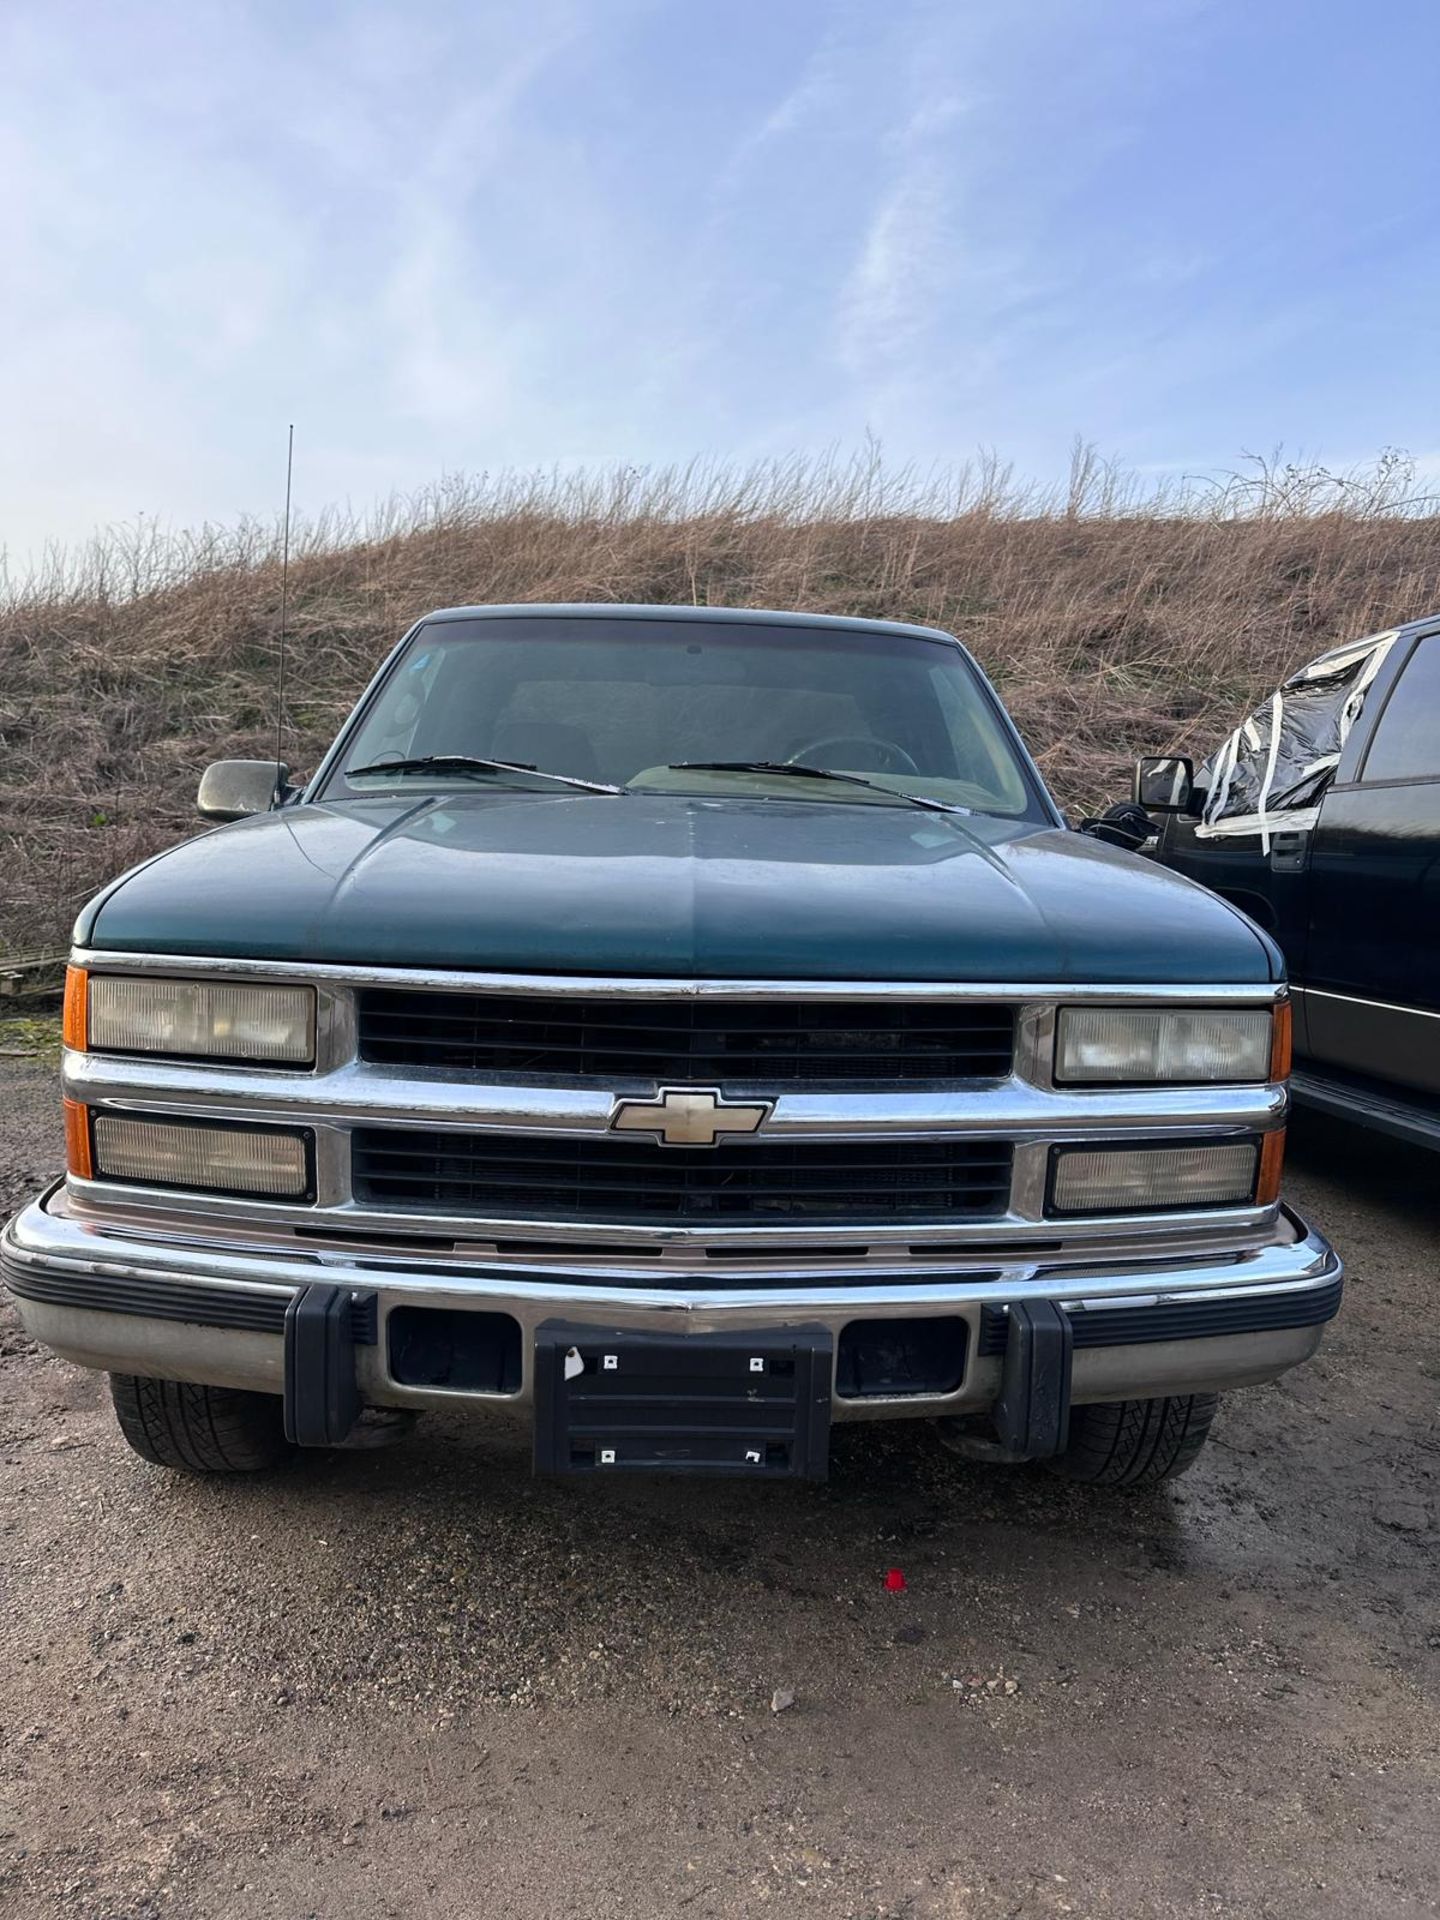 1995 CHEVROLET C2500 - 6.5 V8 TURBO DIESEL - AUTOMATIC GEARBOX - 129,646 MILES - Image 2 of 11